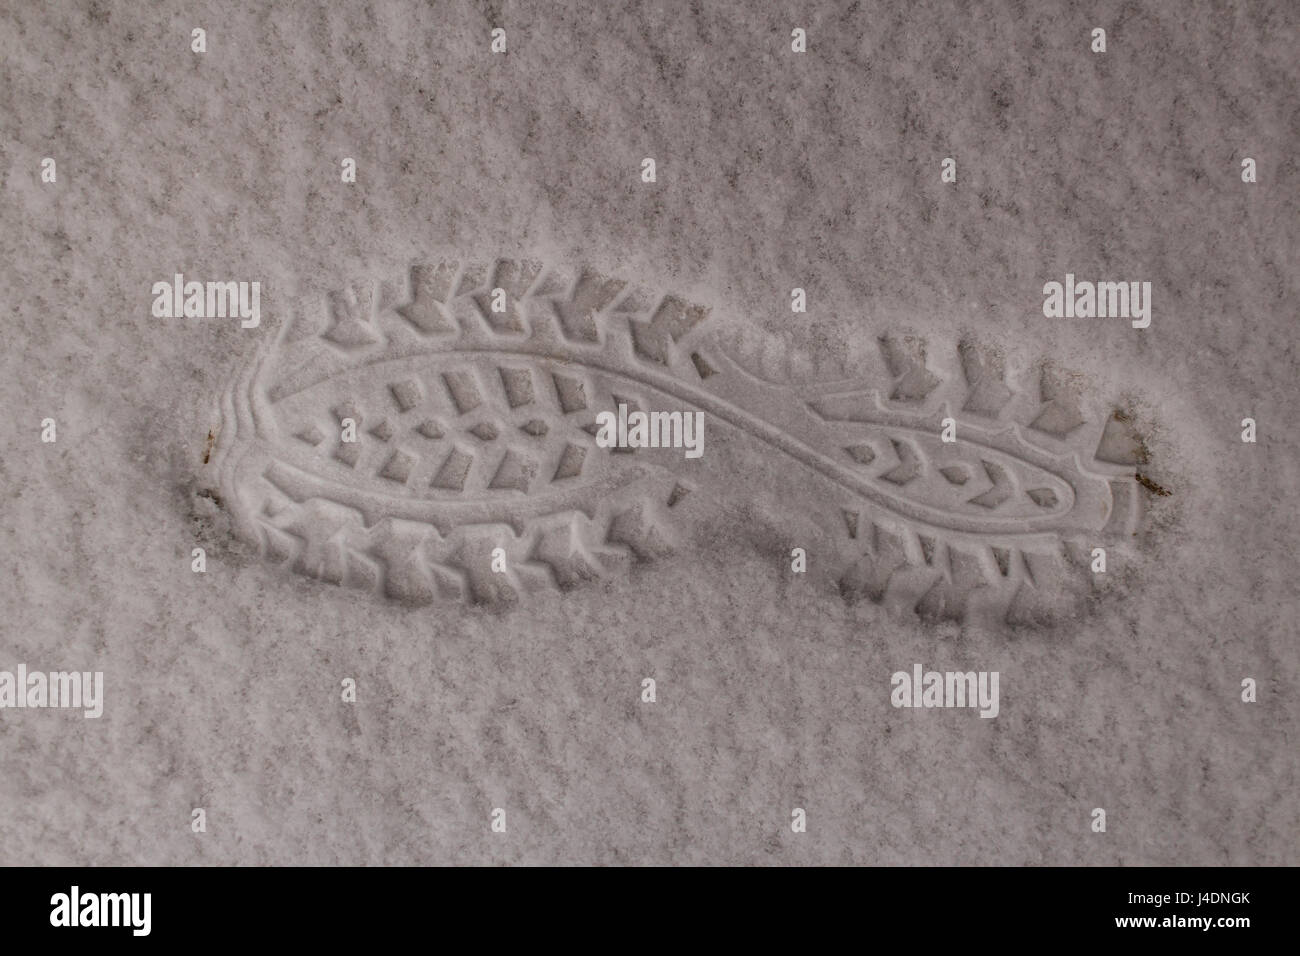 Footprint of the boot on white clear snow. Snow is very fluffy. Winter returned at the end of March. Stock Photo